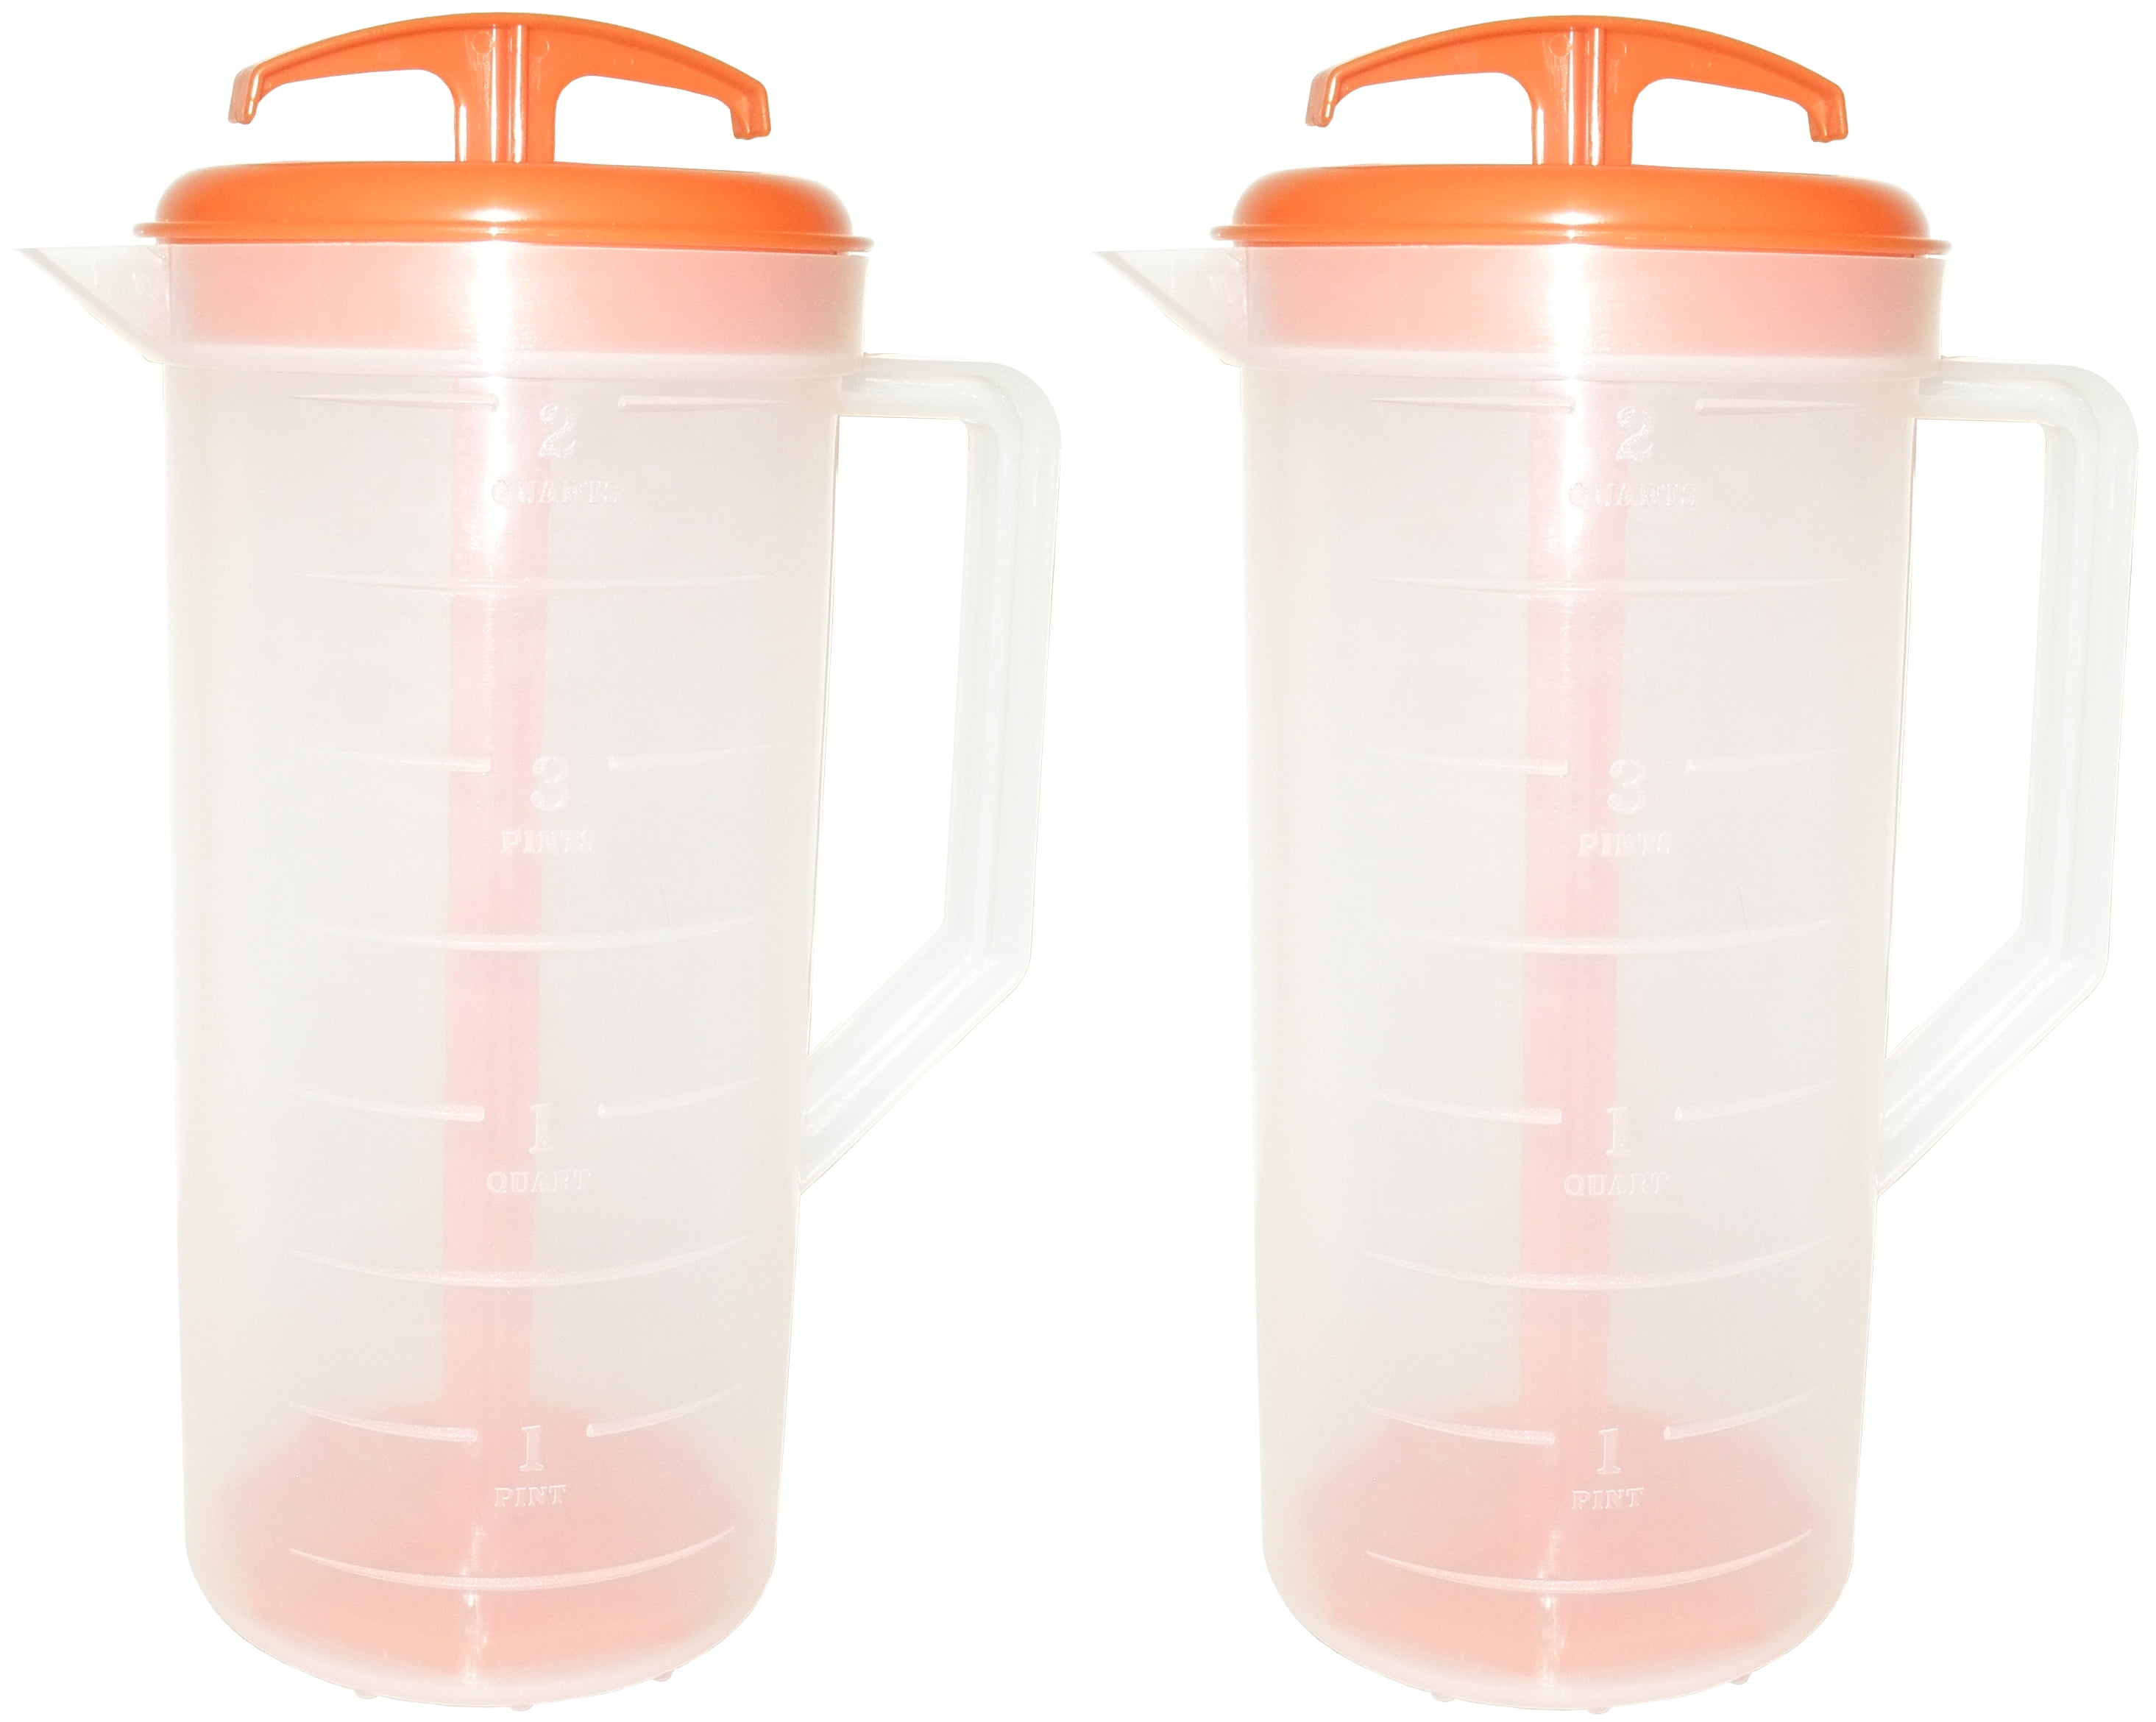 The Original MixStir Mixing Pitcher; Jbk Pottery - Mixing Pitcher for Drinks, Plastic Water Pitcher with Lid and Plunger with Angled Blades, Easy-Mix